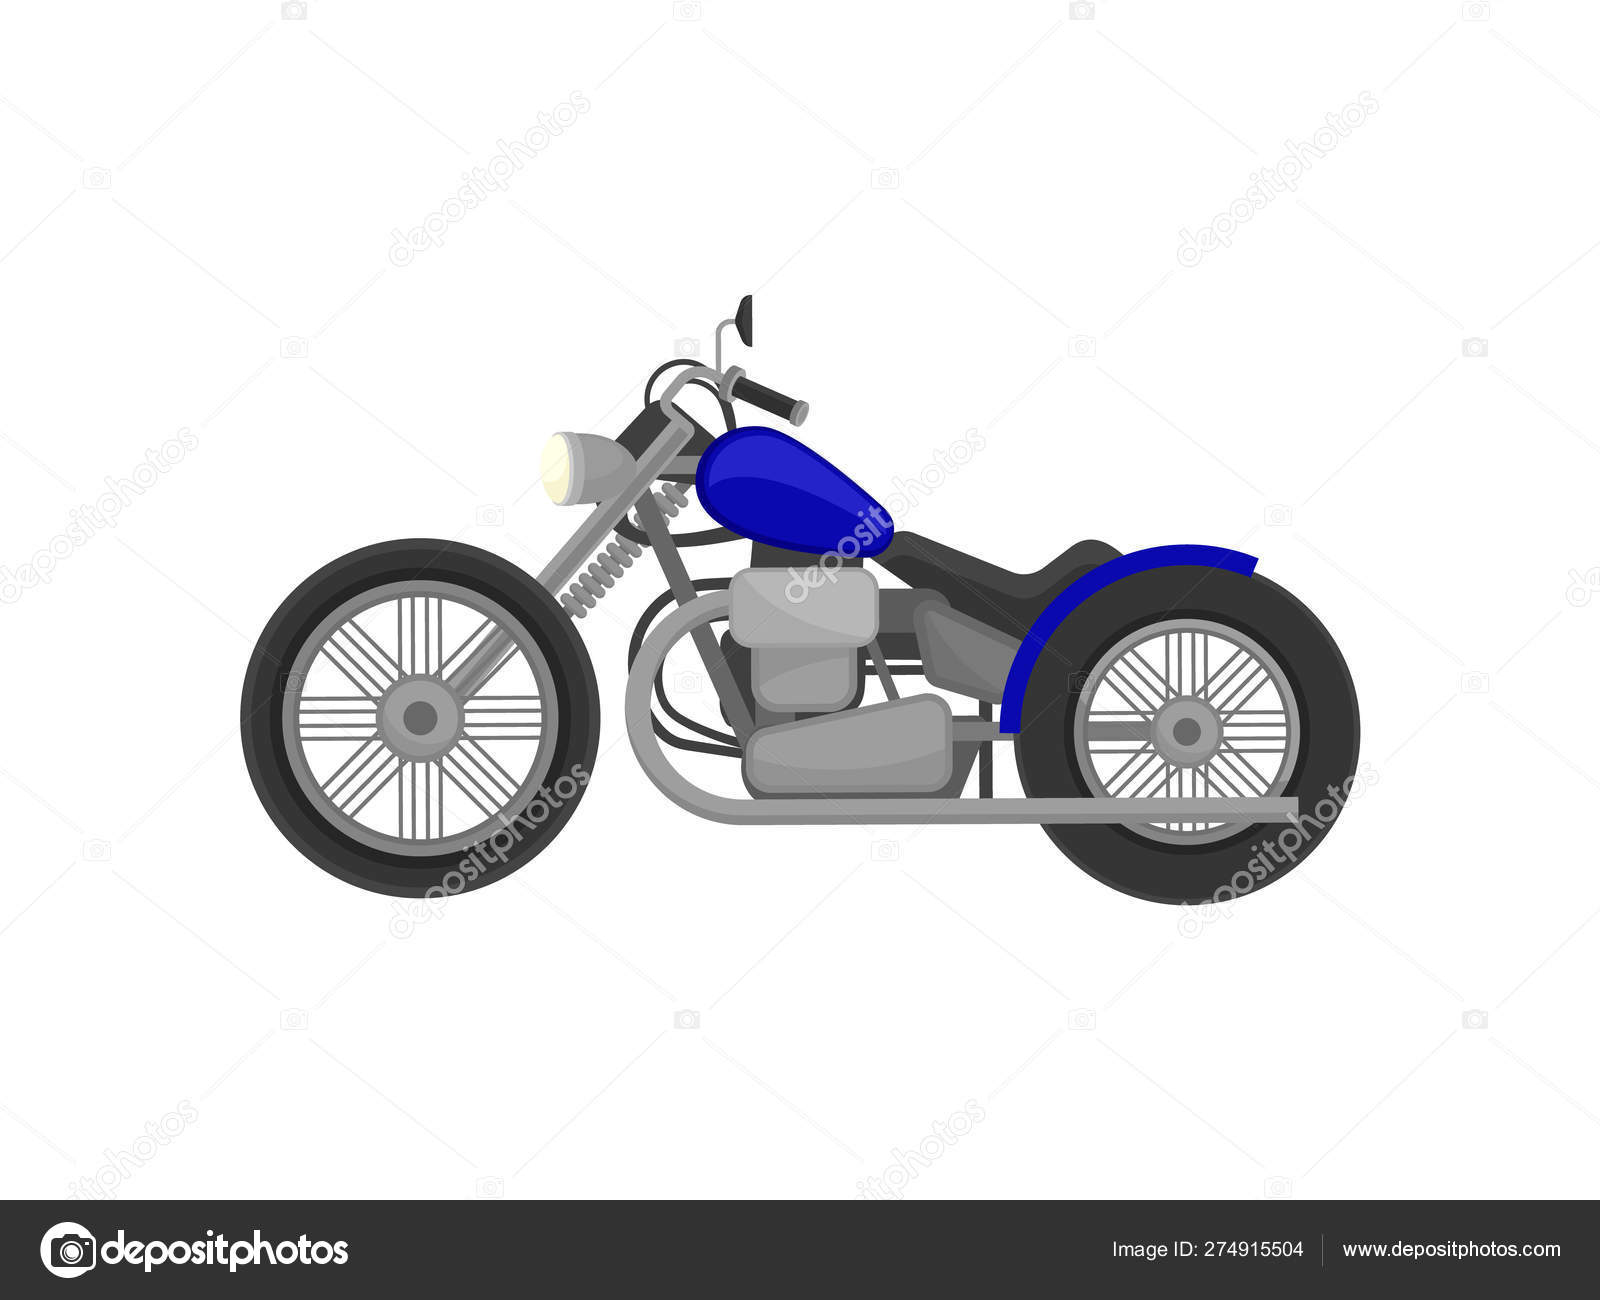 216 Motorcycle Rudder Vector Images Motorcycle Rudder Illustrations Depositphotos